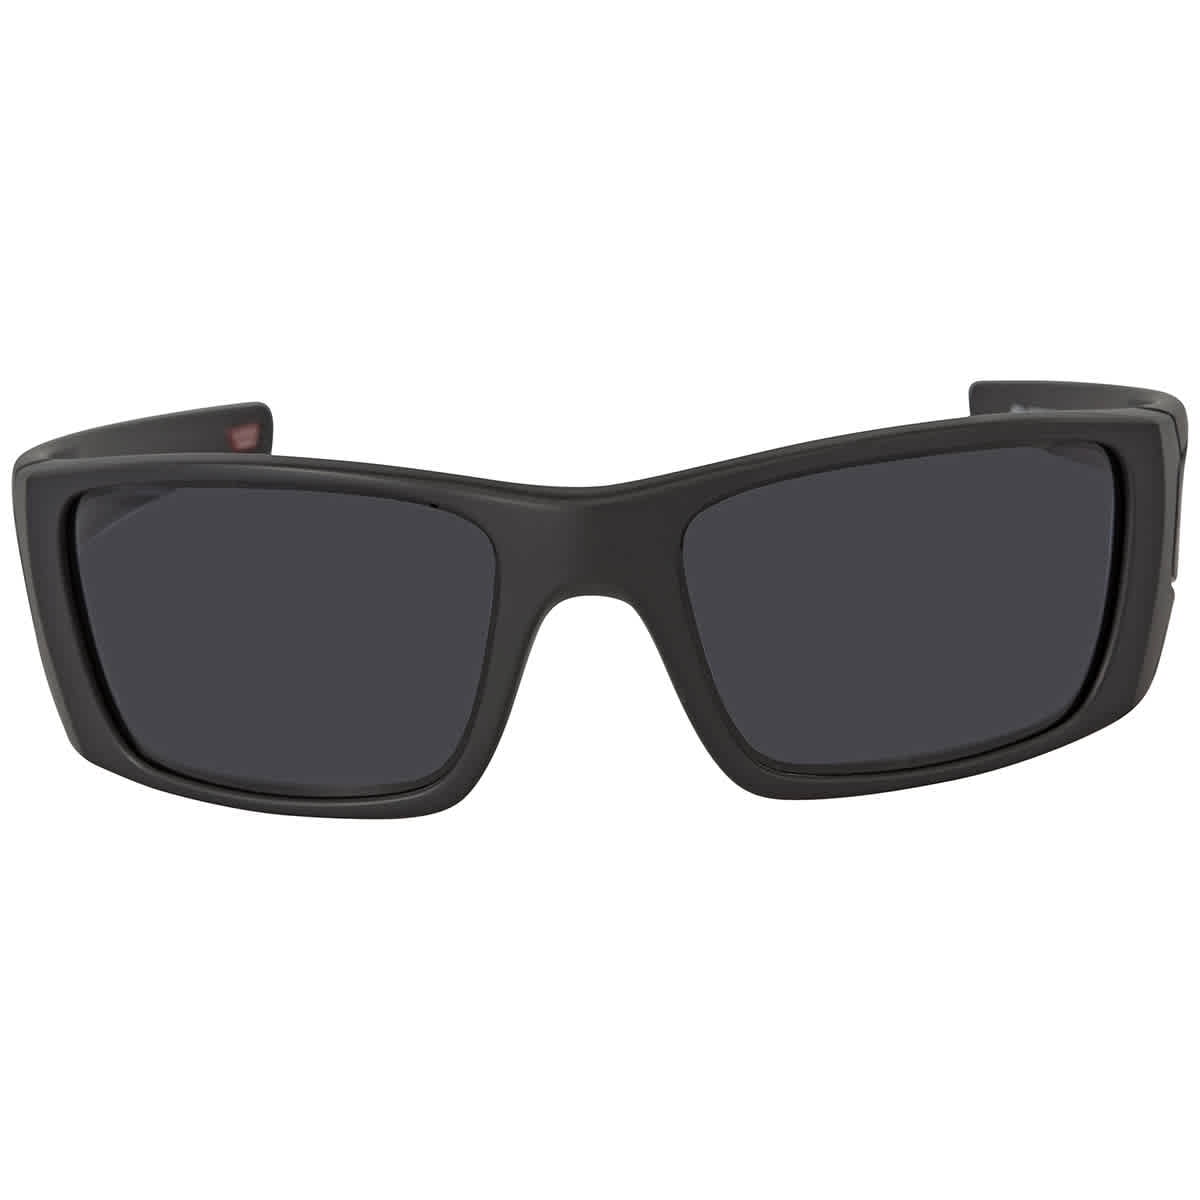 Are Non-Genuine Oakley Replacement Sunglasses Lenses any Good? - Bicycles  Network Australia